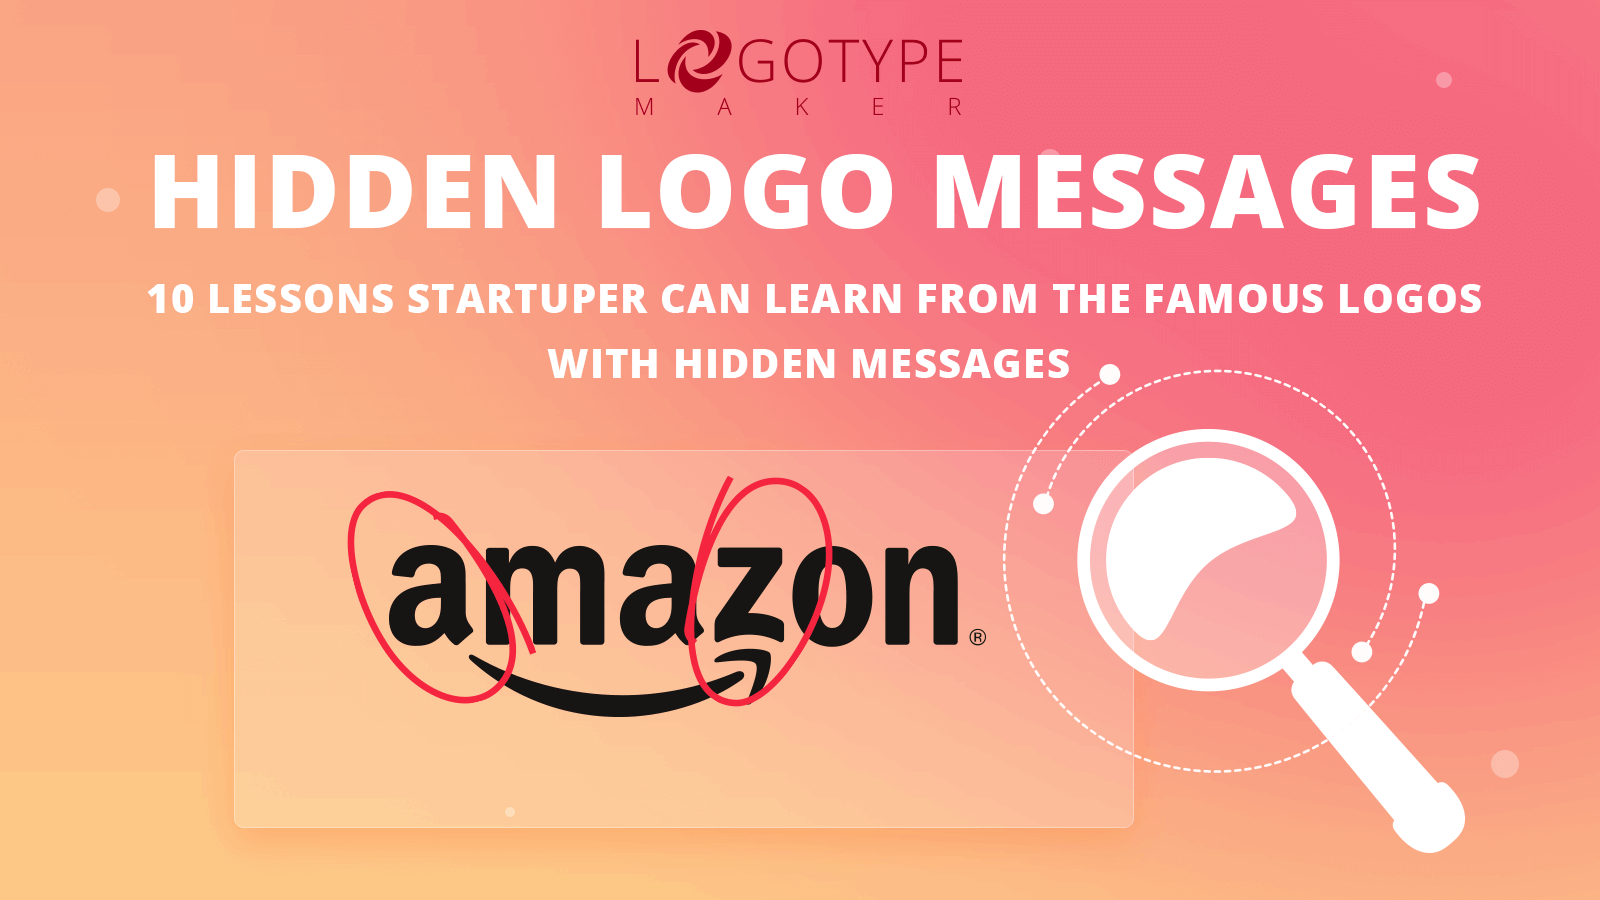 The Famous Logos with Hidden Messages - LogotypeMaker